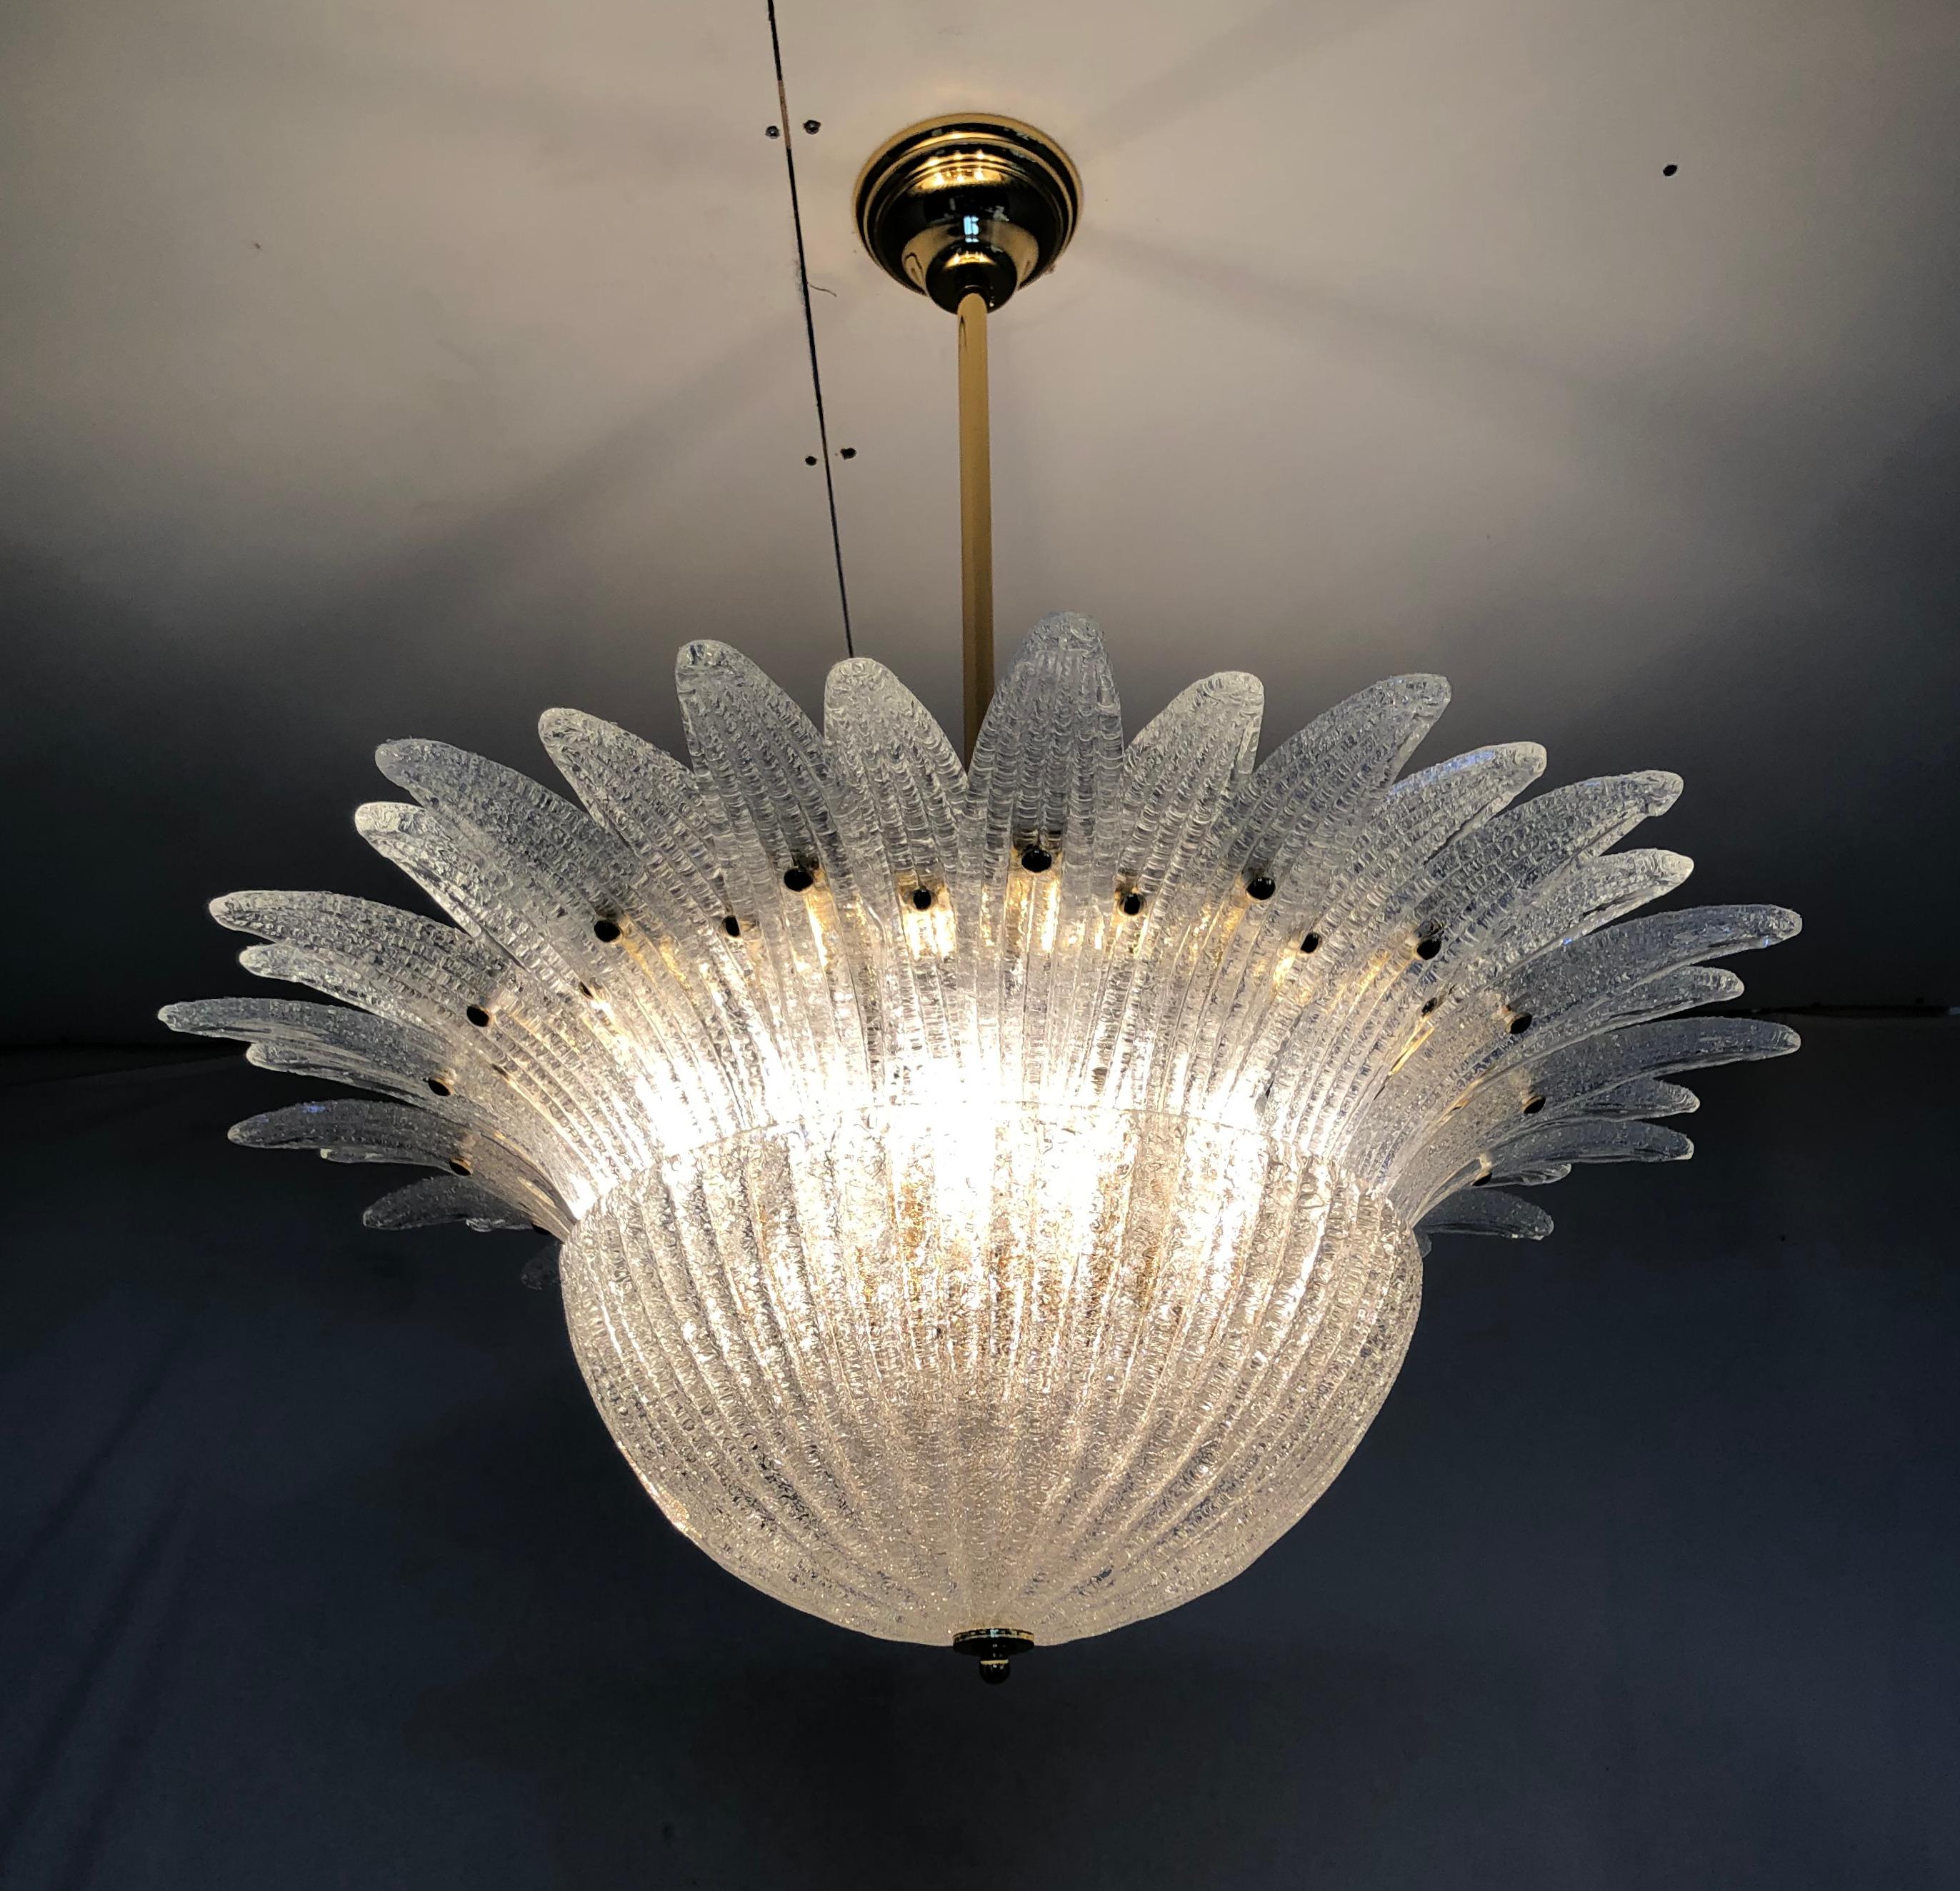 Italian Palmette chandelier shown in clear Murano glass leaves with granular texture using Graniglia technique, mounted on 24k gold metal finish frame / Made in Italy
9 lights / E26 or E27 type / max 60W each
Measures: Diameter 29.5 inches, height